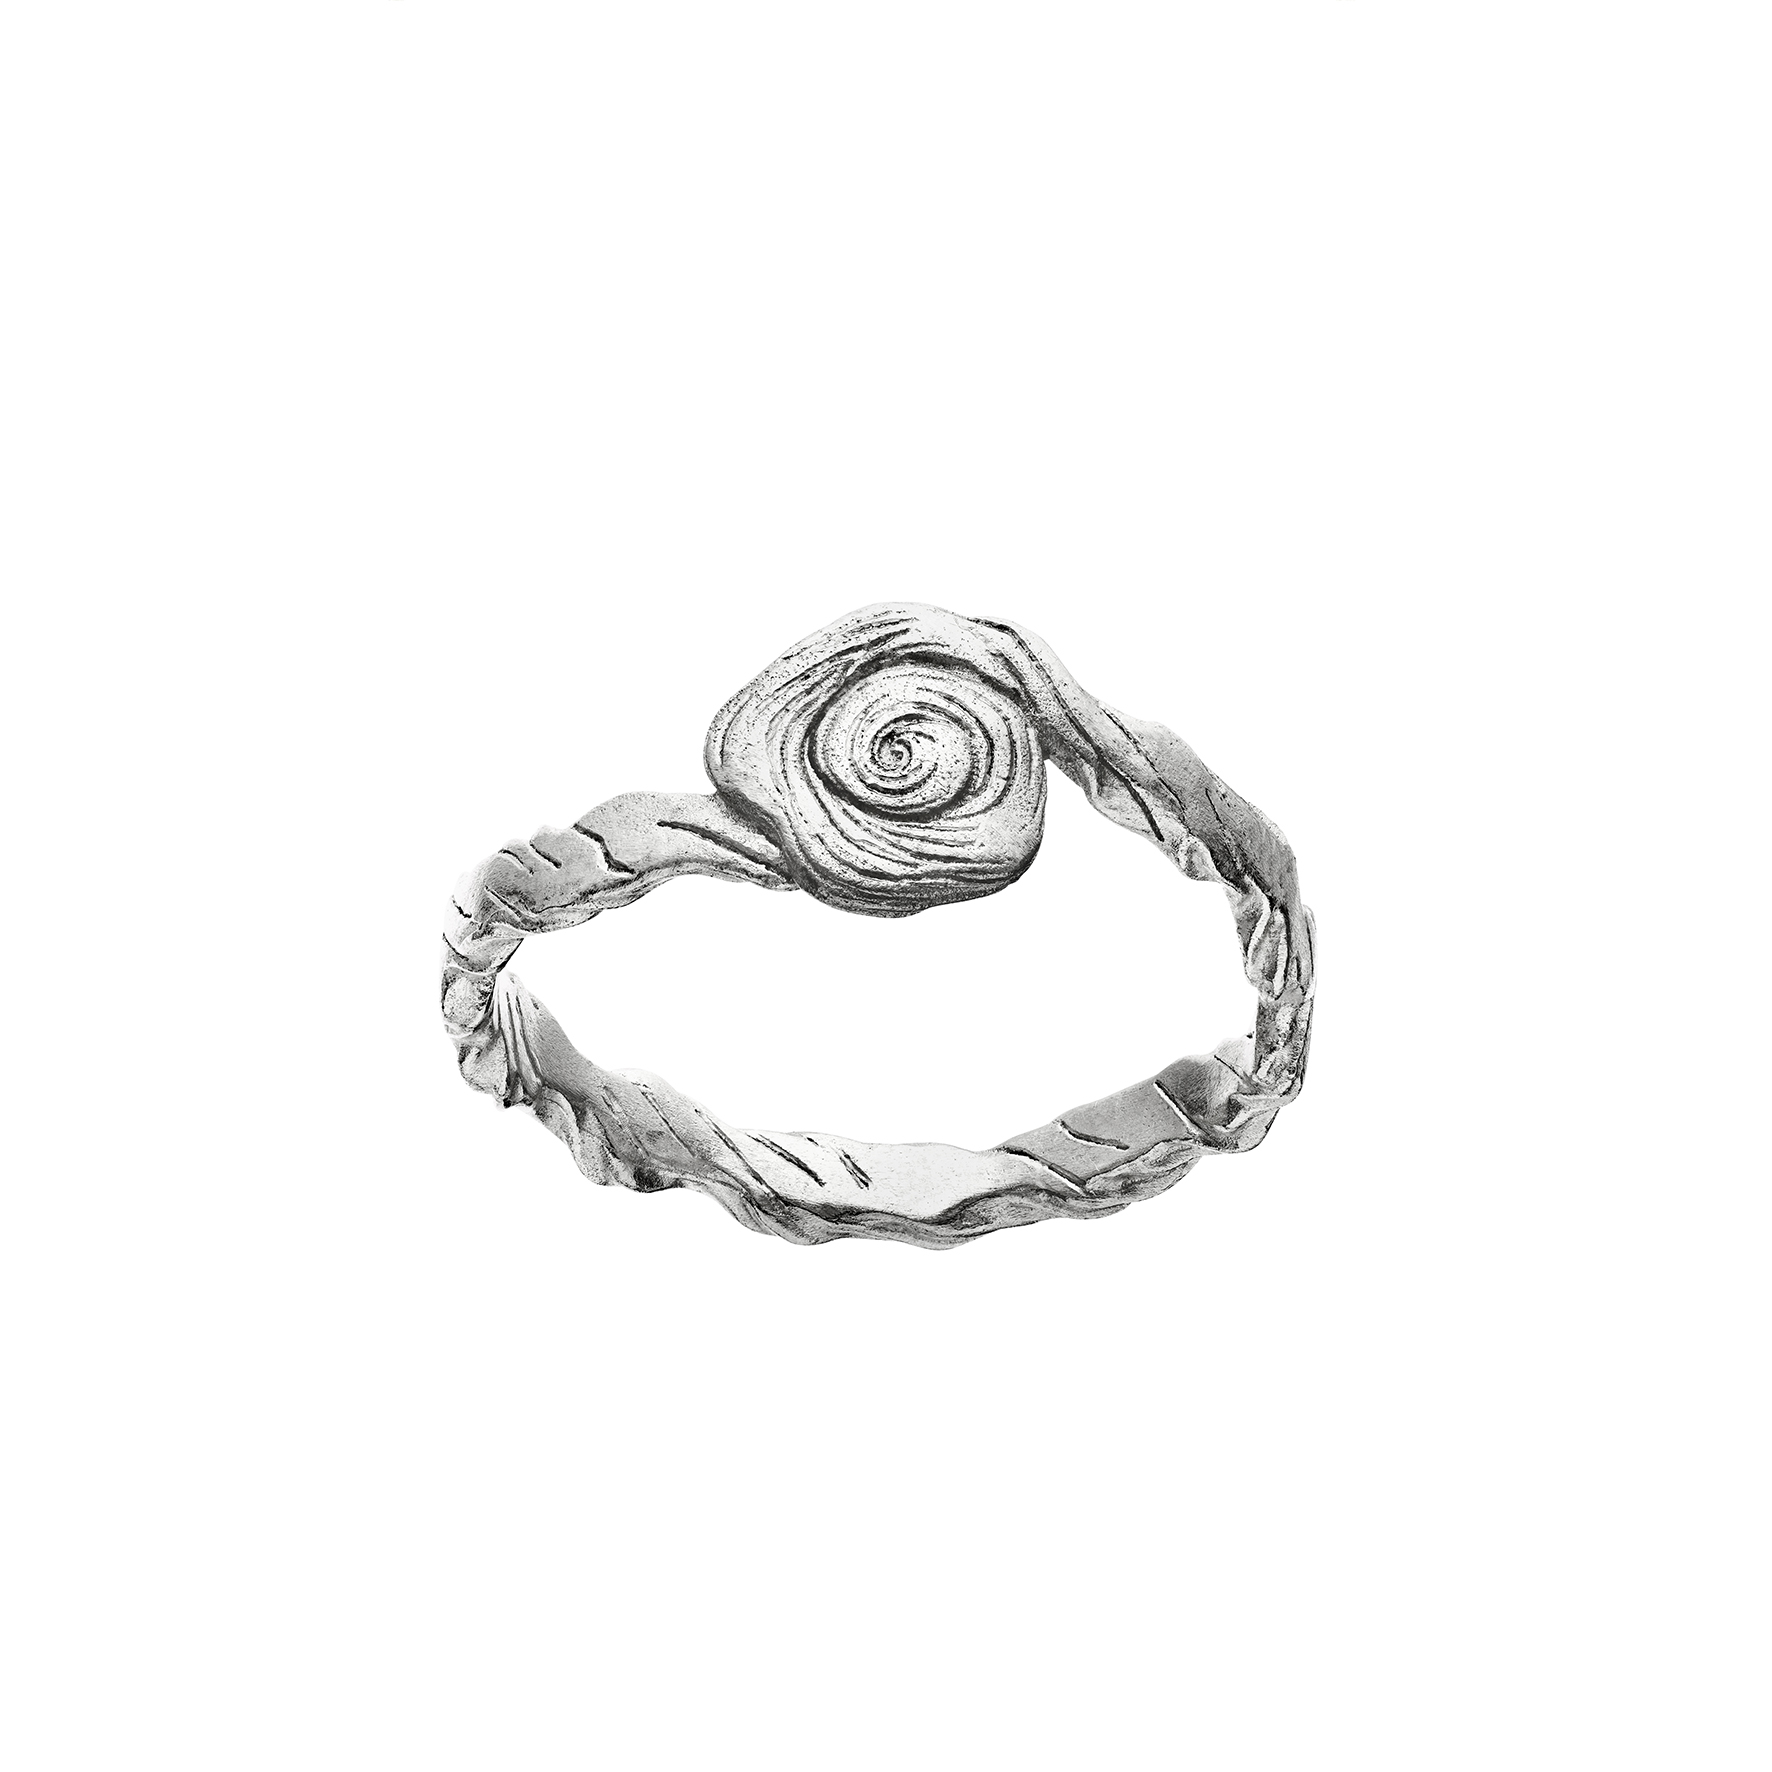 Buy Sterling silver spiral cz ring from Iroc sales